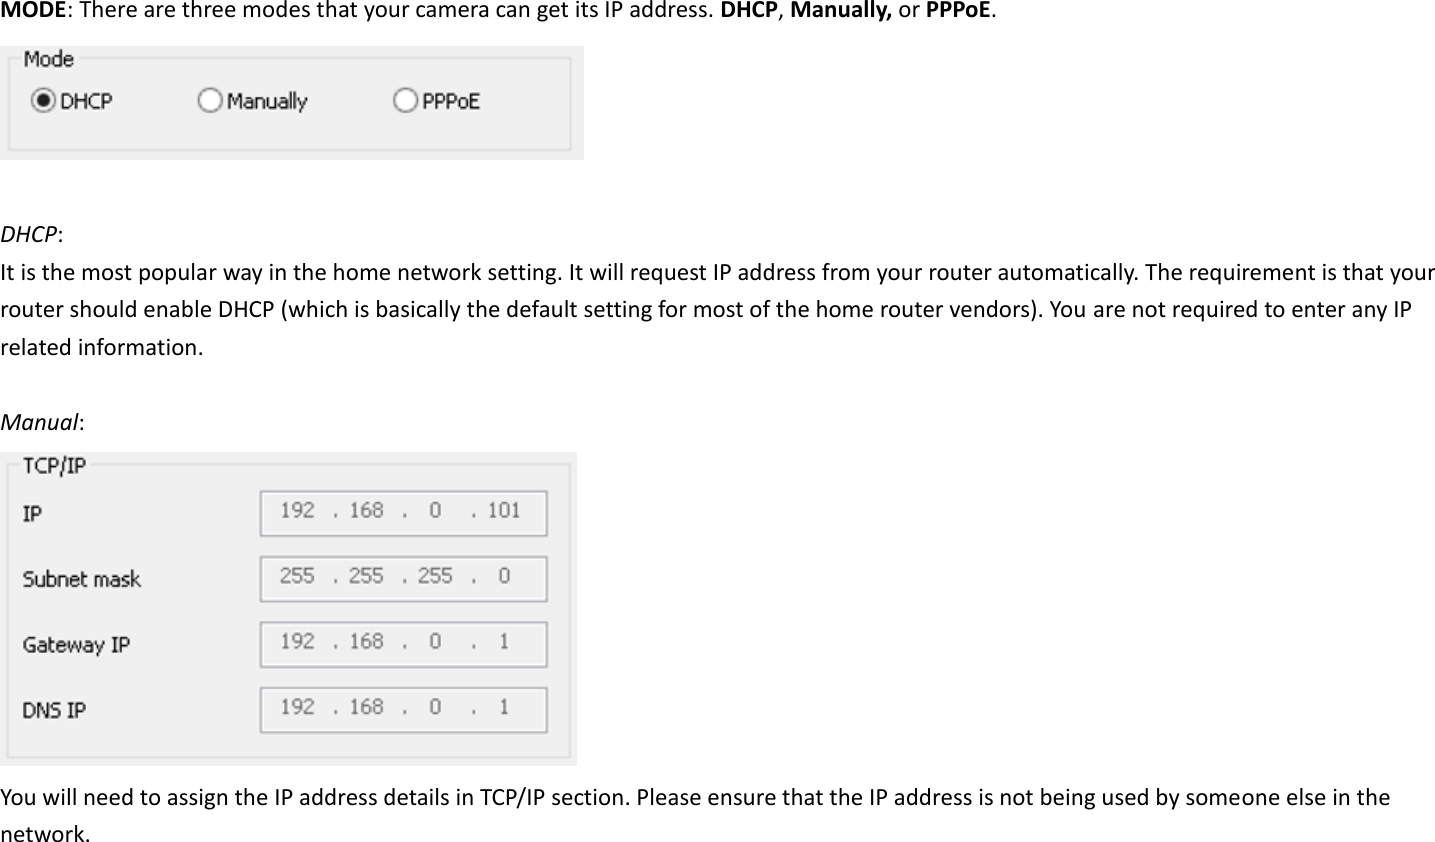 MODE: There are three modes that your camera can get its IP address. DHCP, Manually, or PPPoE.   DHCP:   It is the most popular way in the home network setting. It will request IP address from your router automatically. The requirement is that your router should enable DHCP (which is basically the default setting for most of the home router vendors). You are not required to enter any IP related information.  Manual:    You will need to assign the IP address details in TCP/IP section. Please ensure that the IP address is not being used by someone else in the network.   